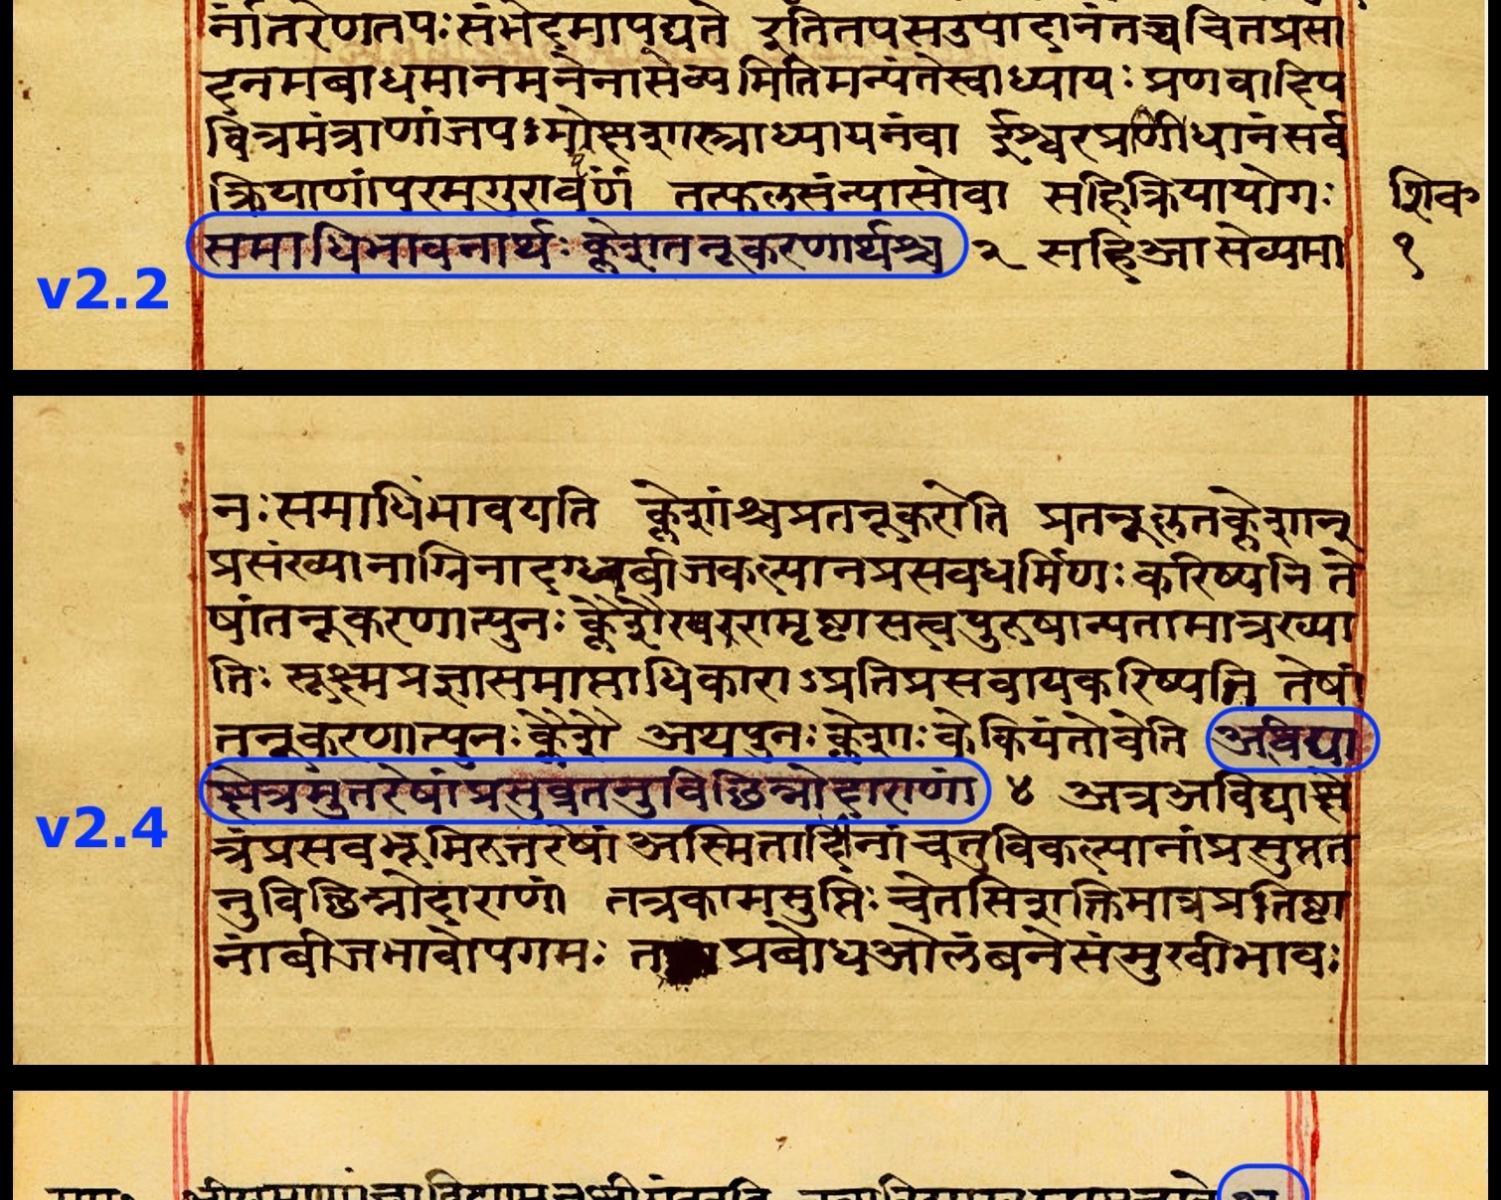 The major characteristic features of Patanjal Yoga sutras are: